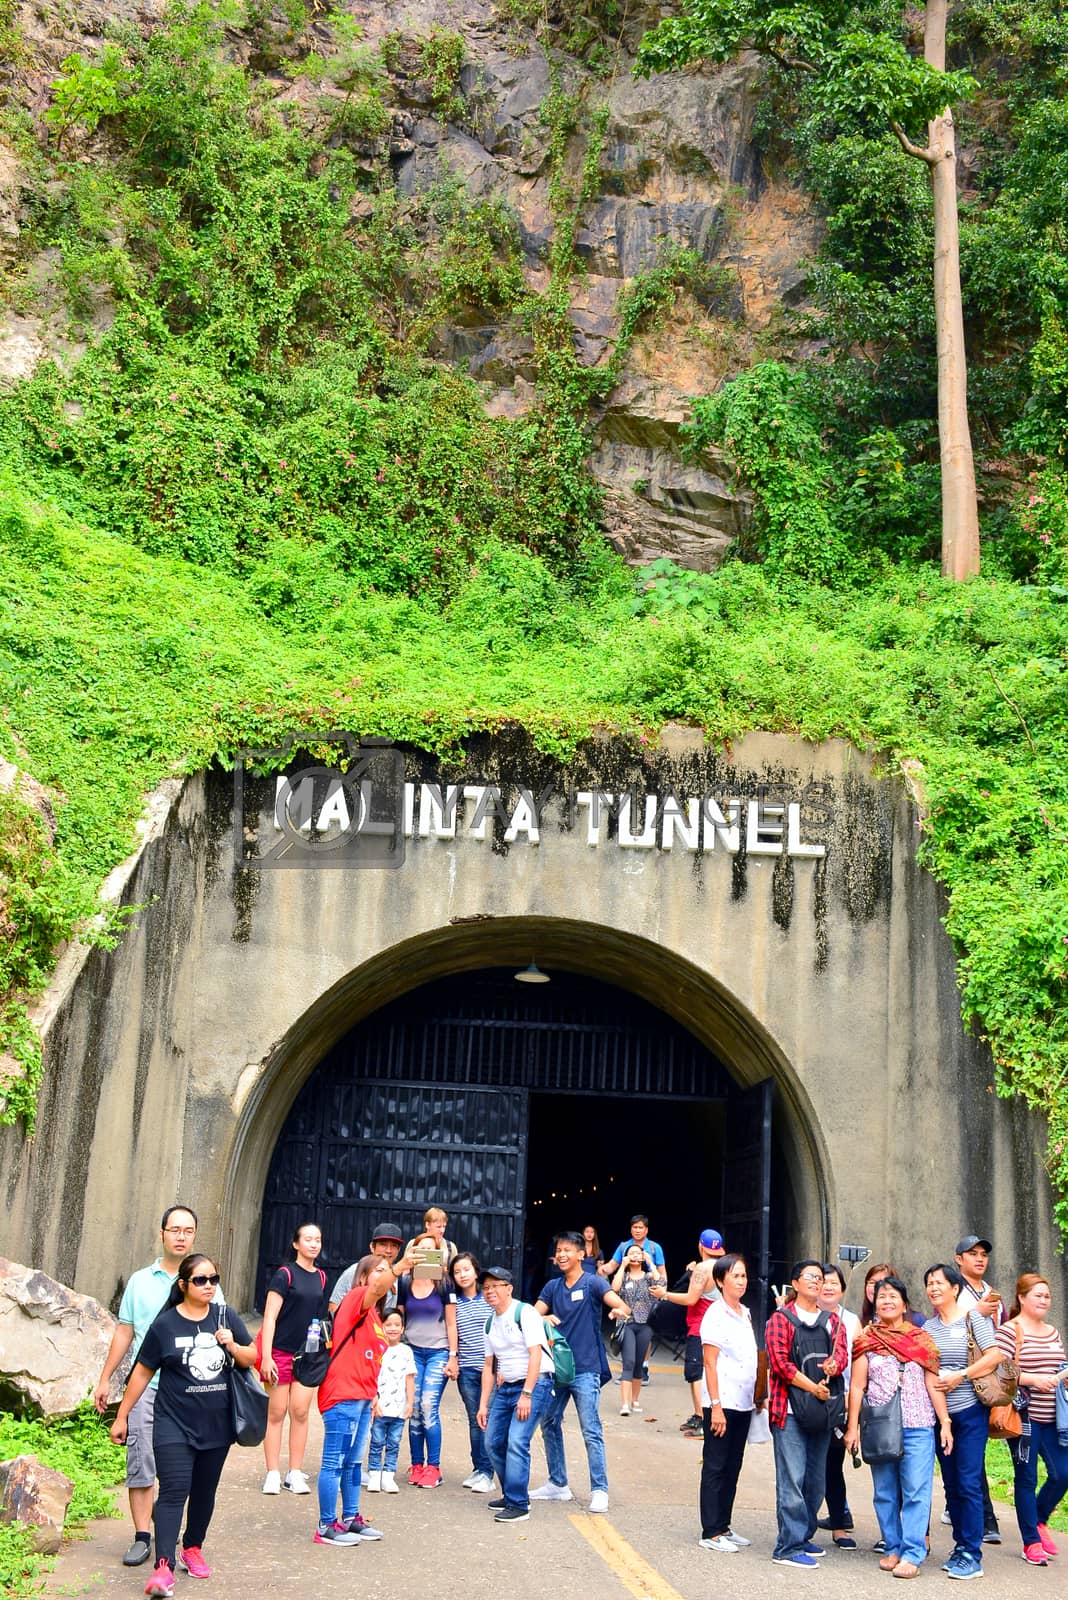 Royalty free image of Malinta tunnel at Corregidor island in Cavite, Philippines by imwaltersy